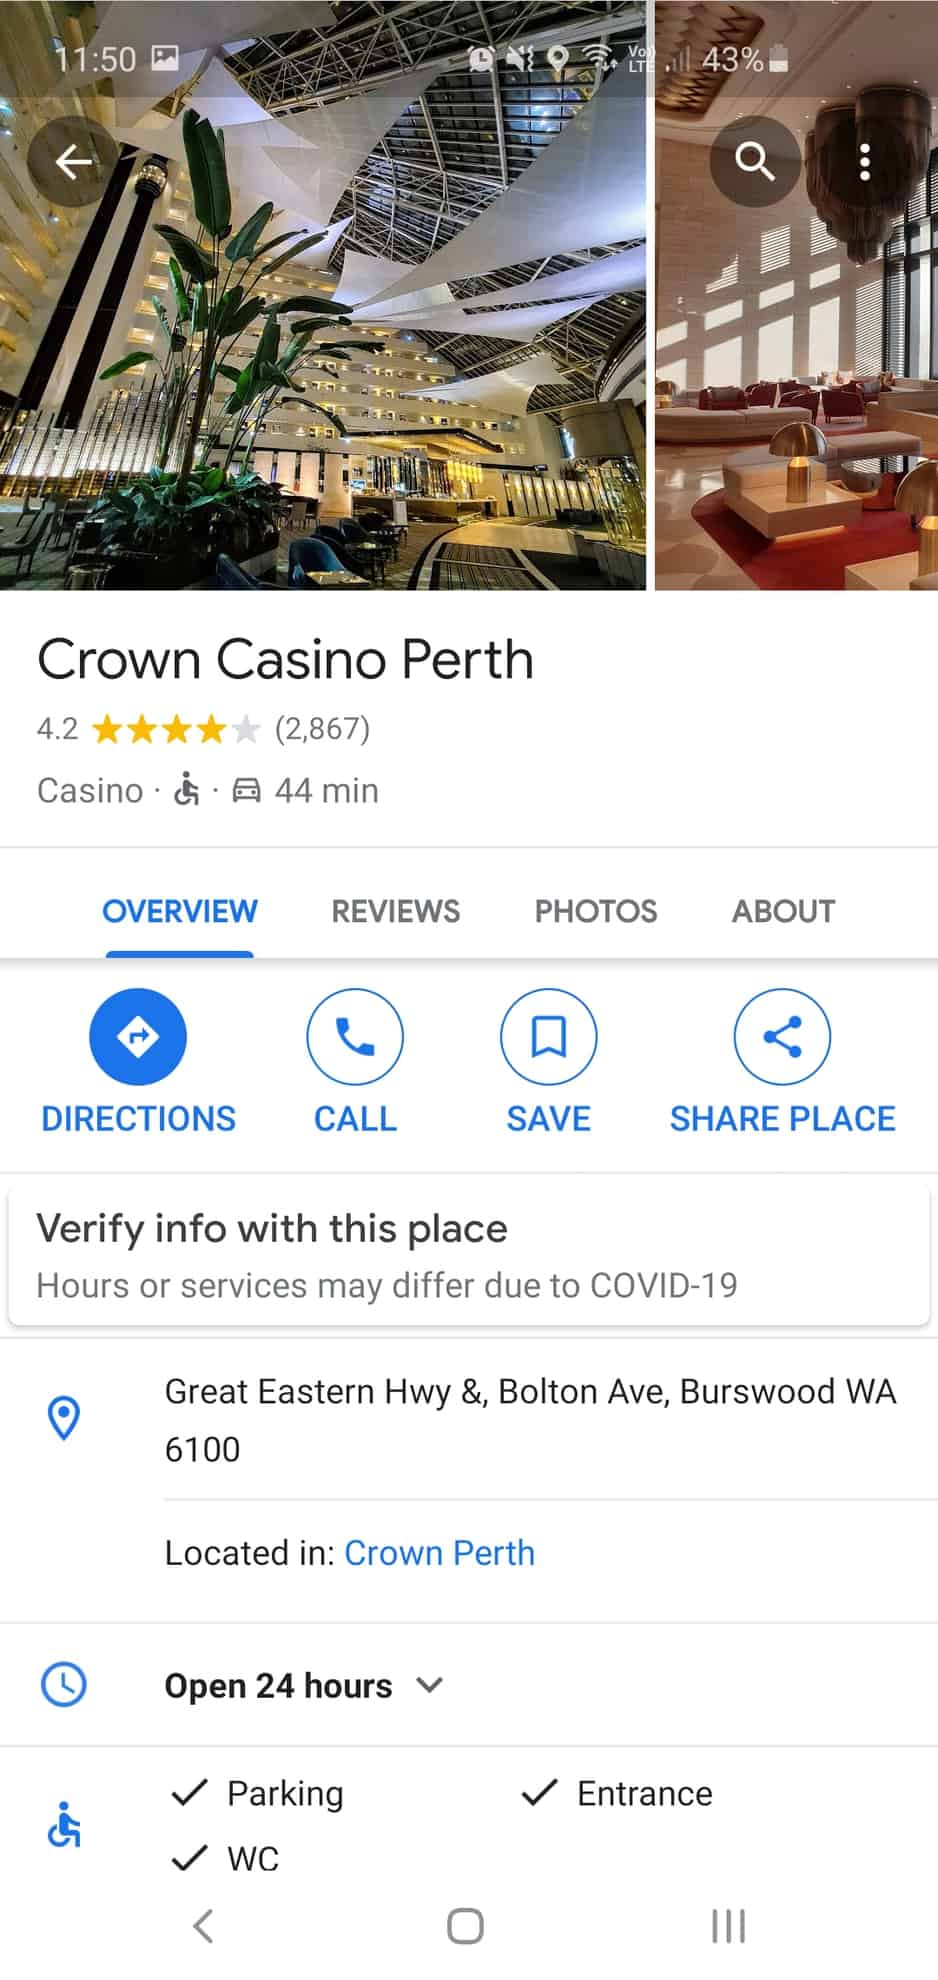 Example of a business listing showing accessible parking, entrance and toilets.